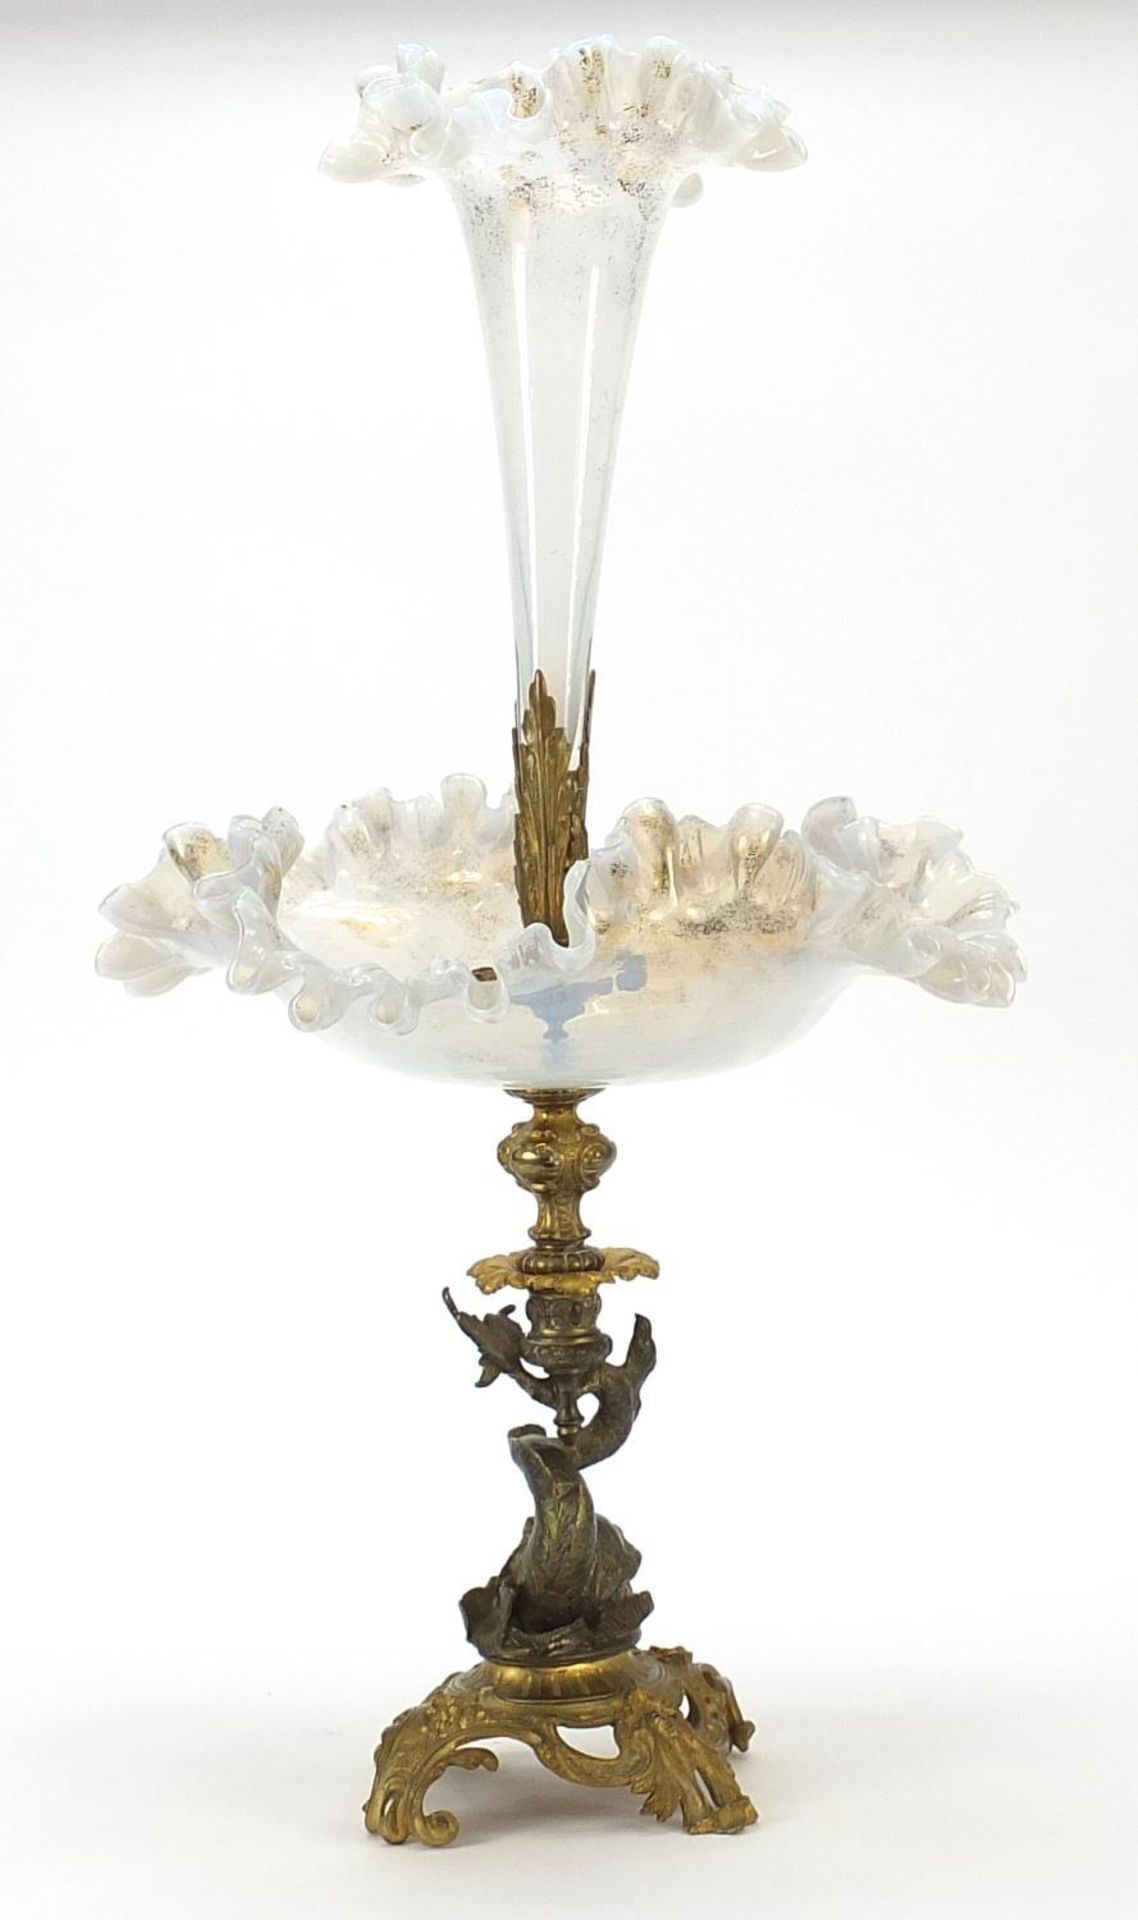 19th century opaline glass and gilt bronze dolphin centrepiece with frilled glass flute, 56cm high - Image 4 of 6